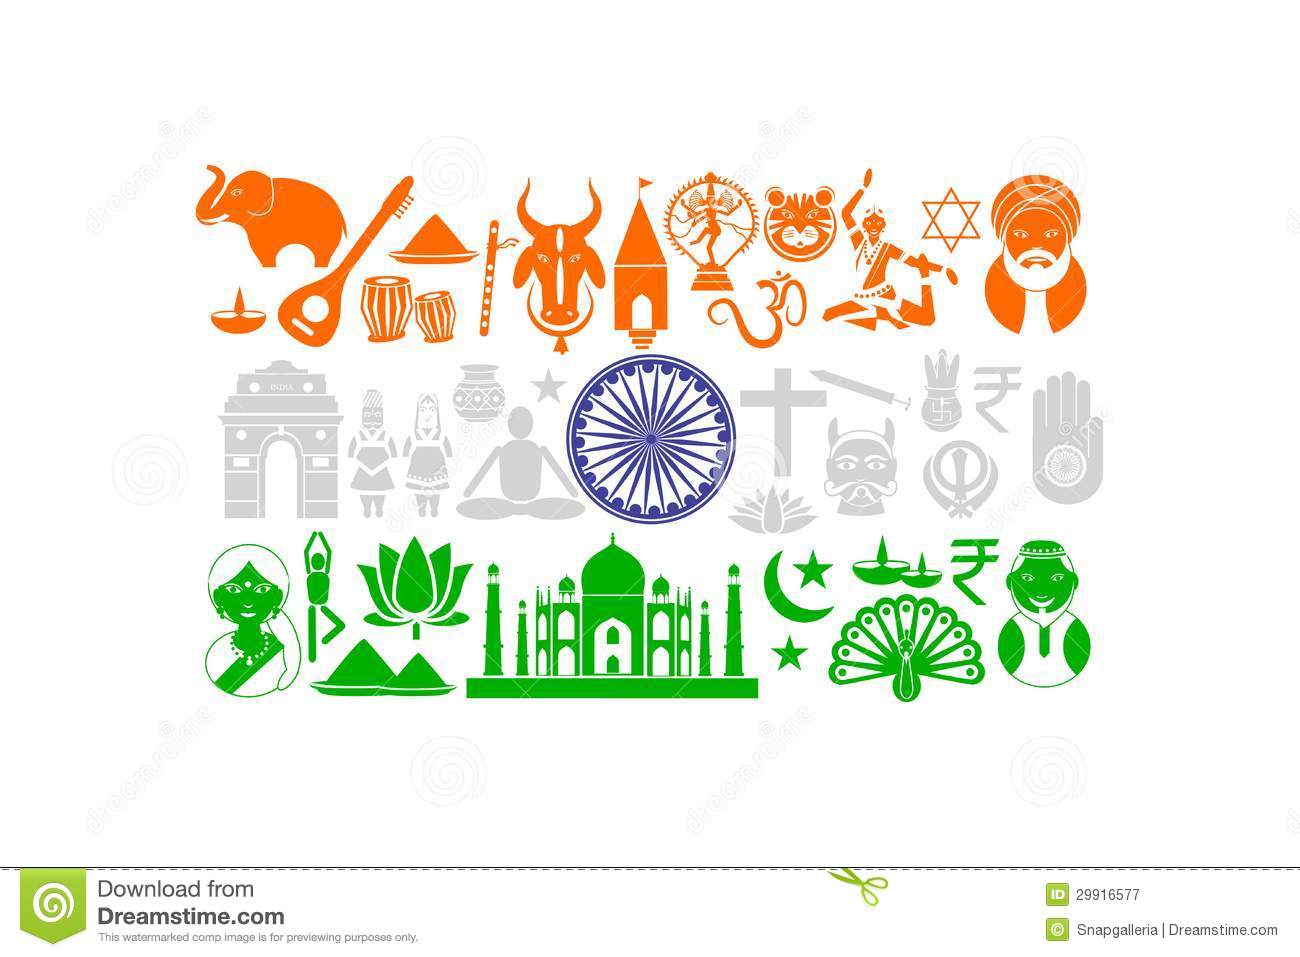 Easy To Edit Vector Illustration Of Indian Flag With Cultural Object